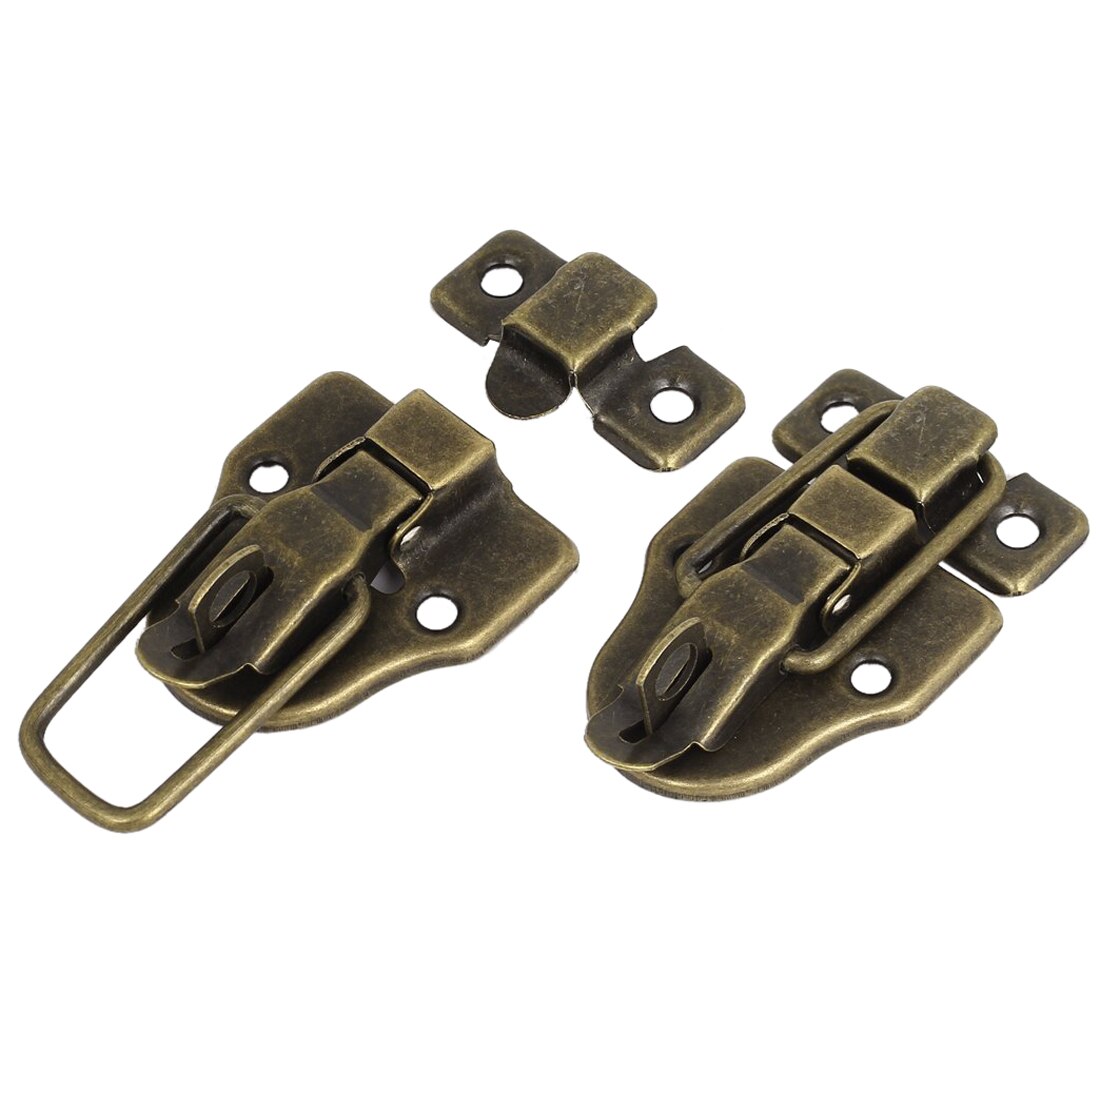 Boxes Duckbilled Metal Toggle Latch Catch Hasp Bronze Tone 4PCS - ebowsos